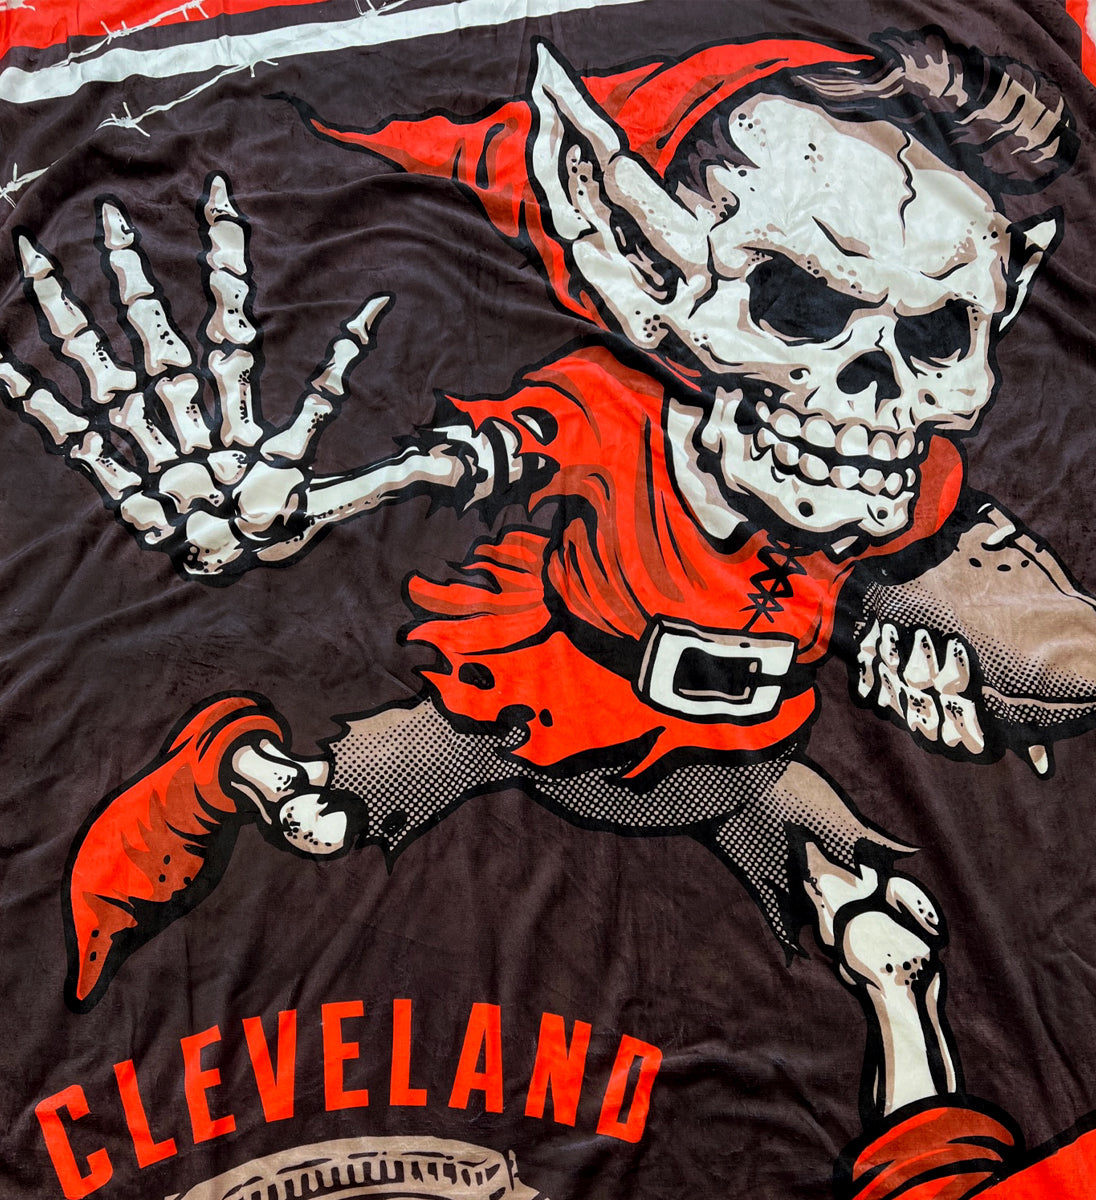 Cleveland Football For Life Blanket